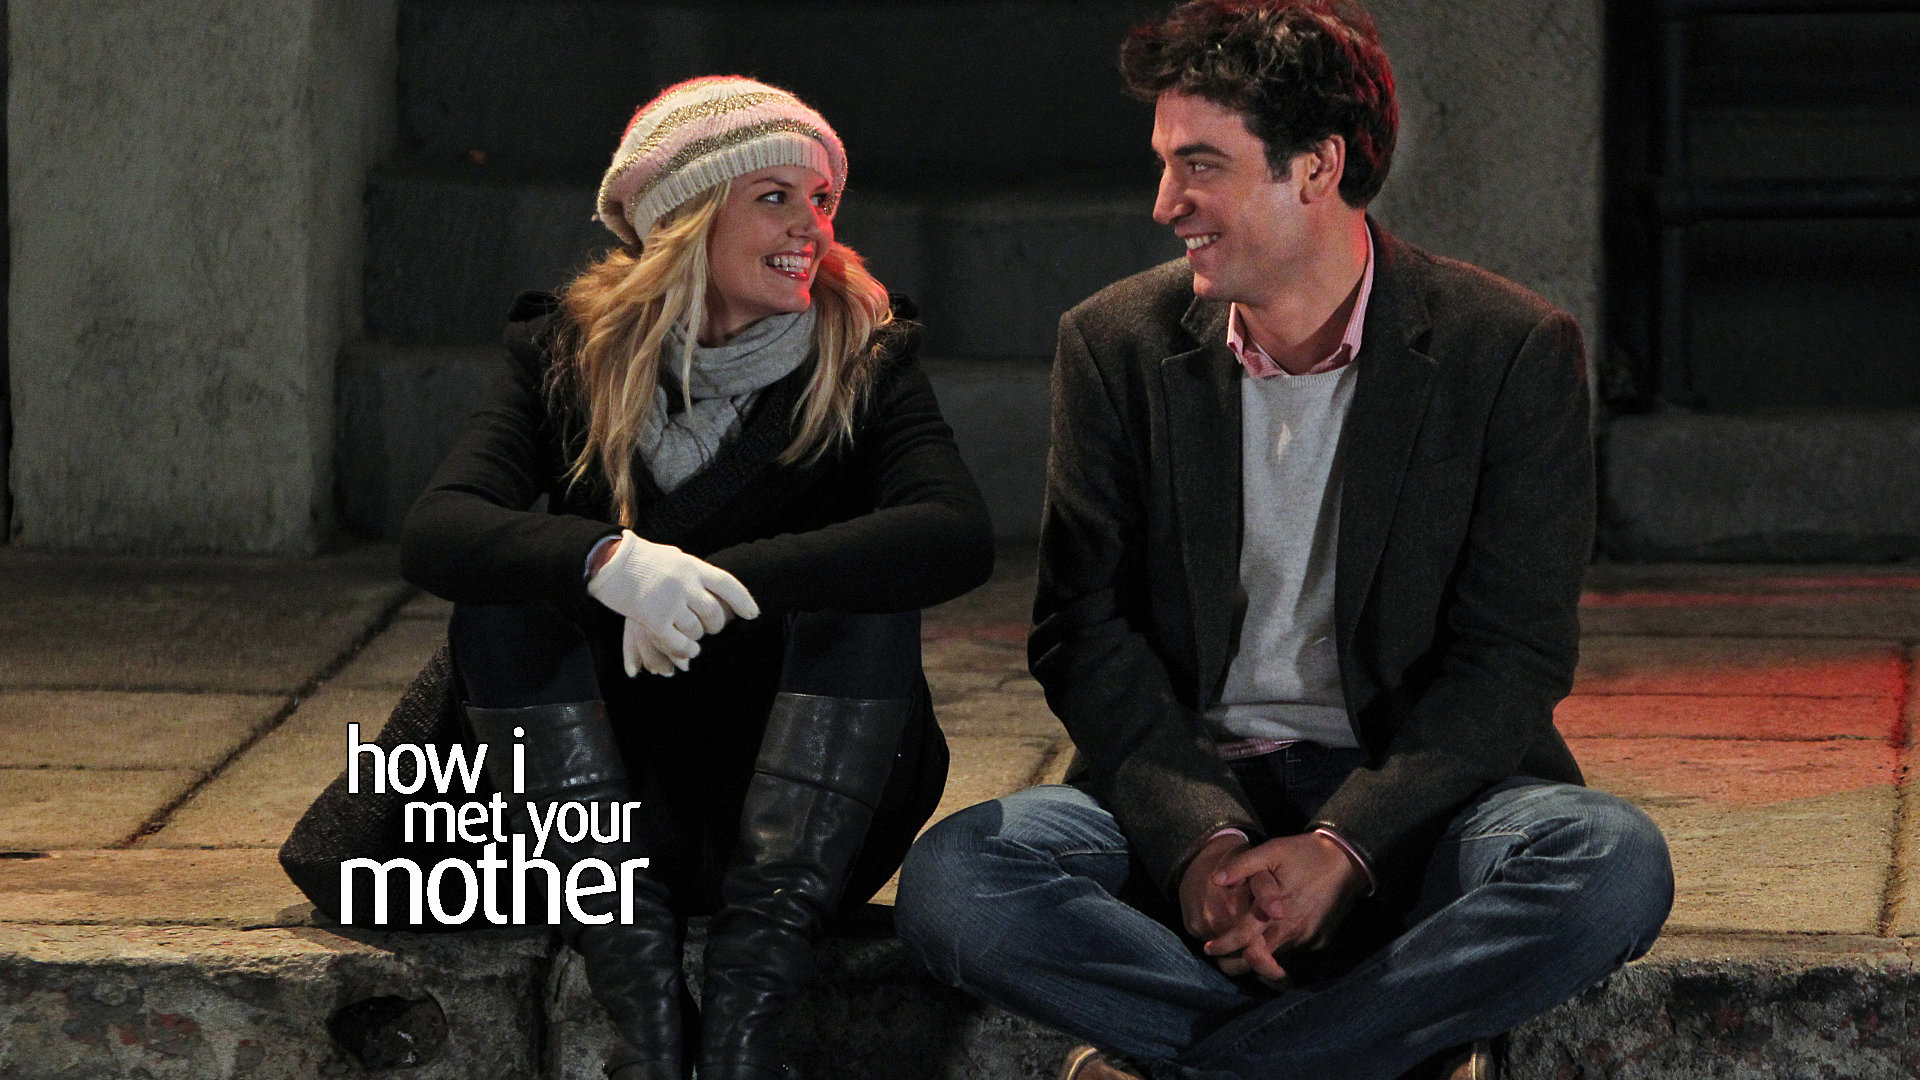 How I Met Your Mother Wallpapers 1920x1080 Full Hd 1080p Desktop Images, Photos, Reviews